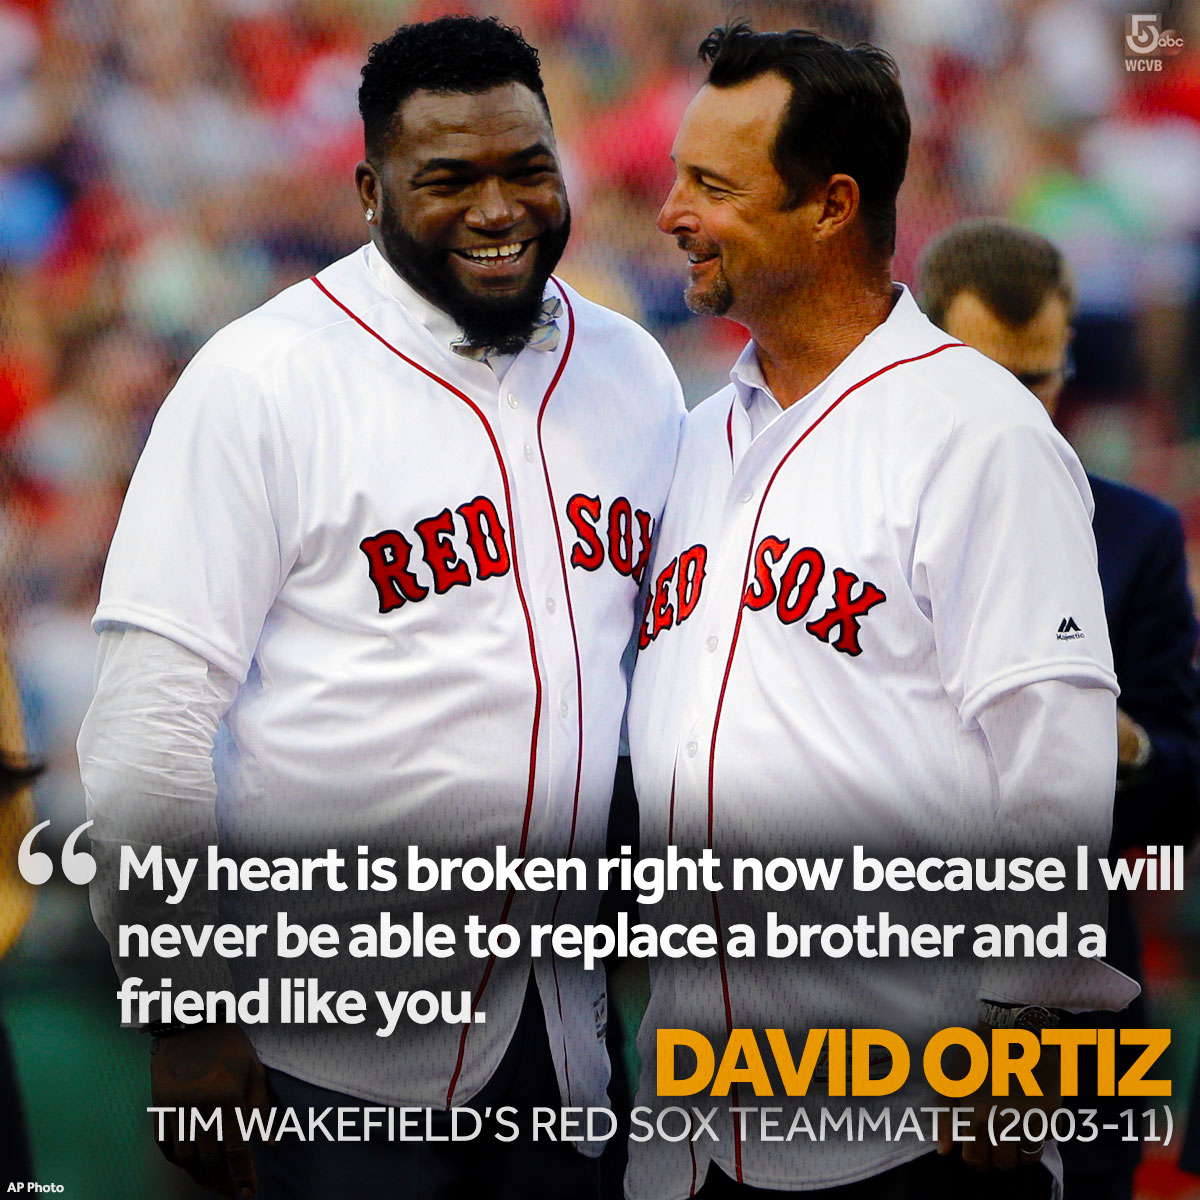 Like many in Red Sox Nation, Big Papi is grieving after learning about the death of his longtime teammate Tim Wakefield. 💔 on.wcvb.com/3LK4zfo